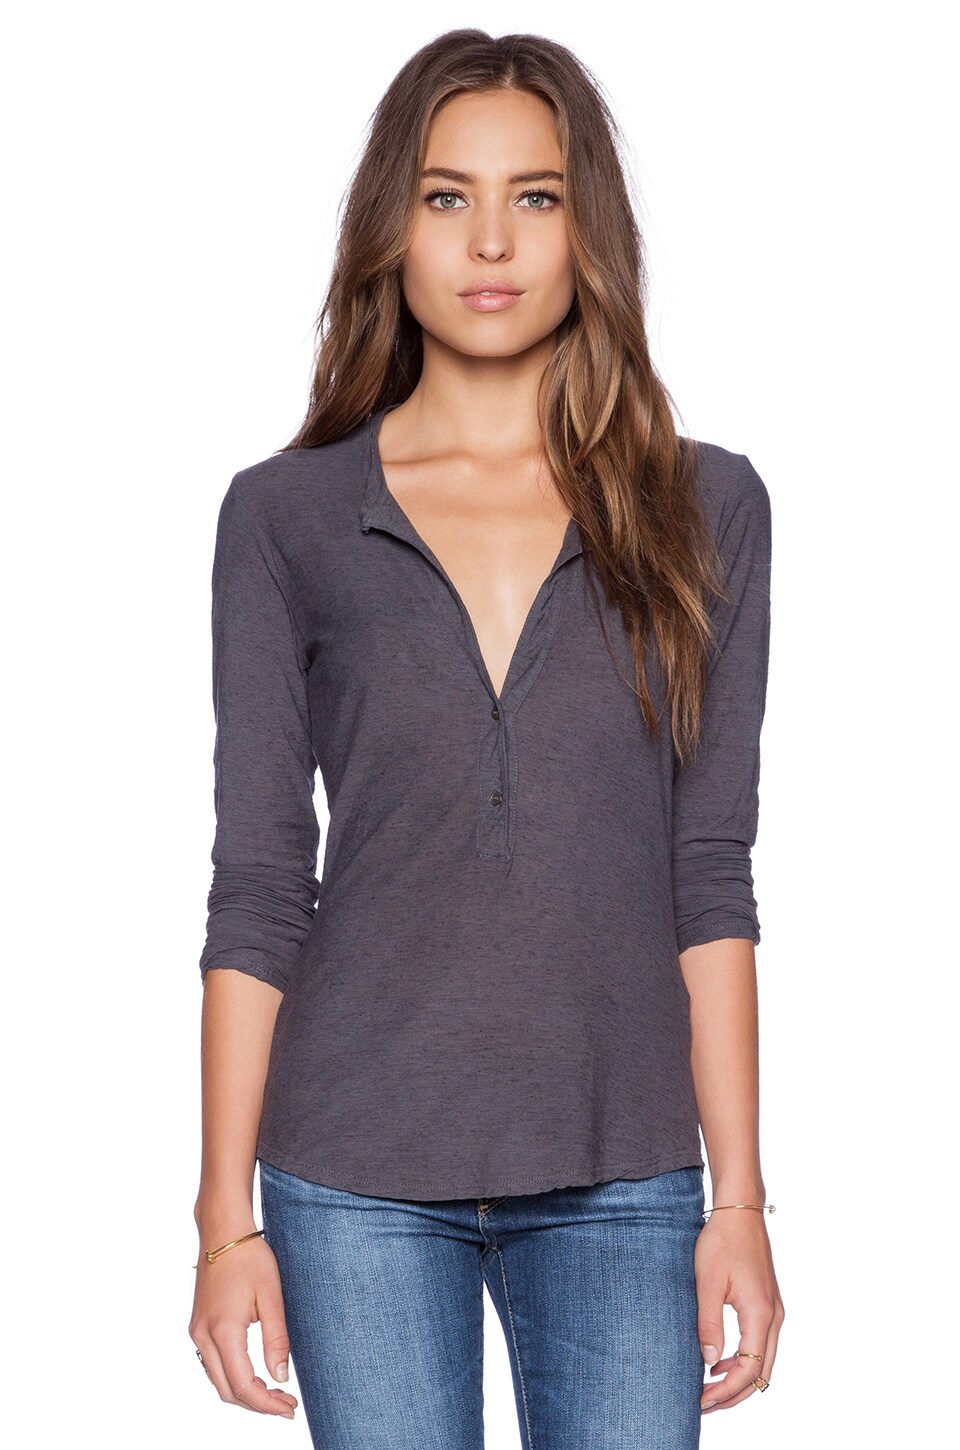 James Perse Slub Jersey Button Up in Carbon | REVOLVE